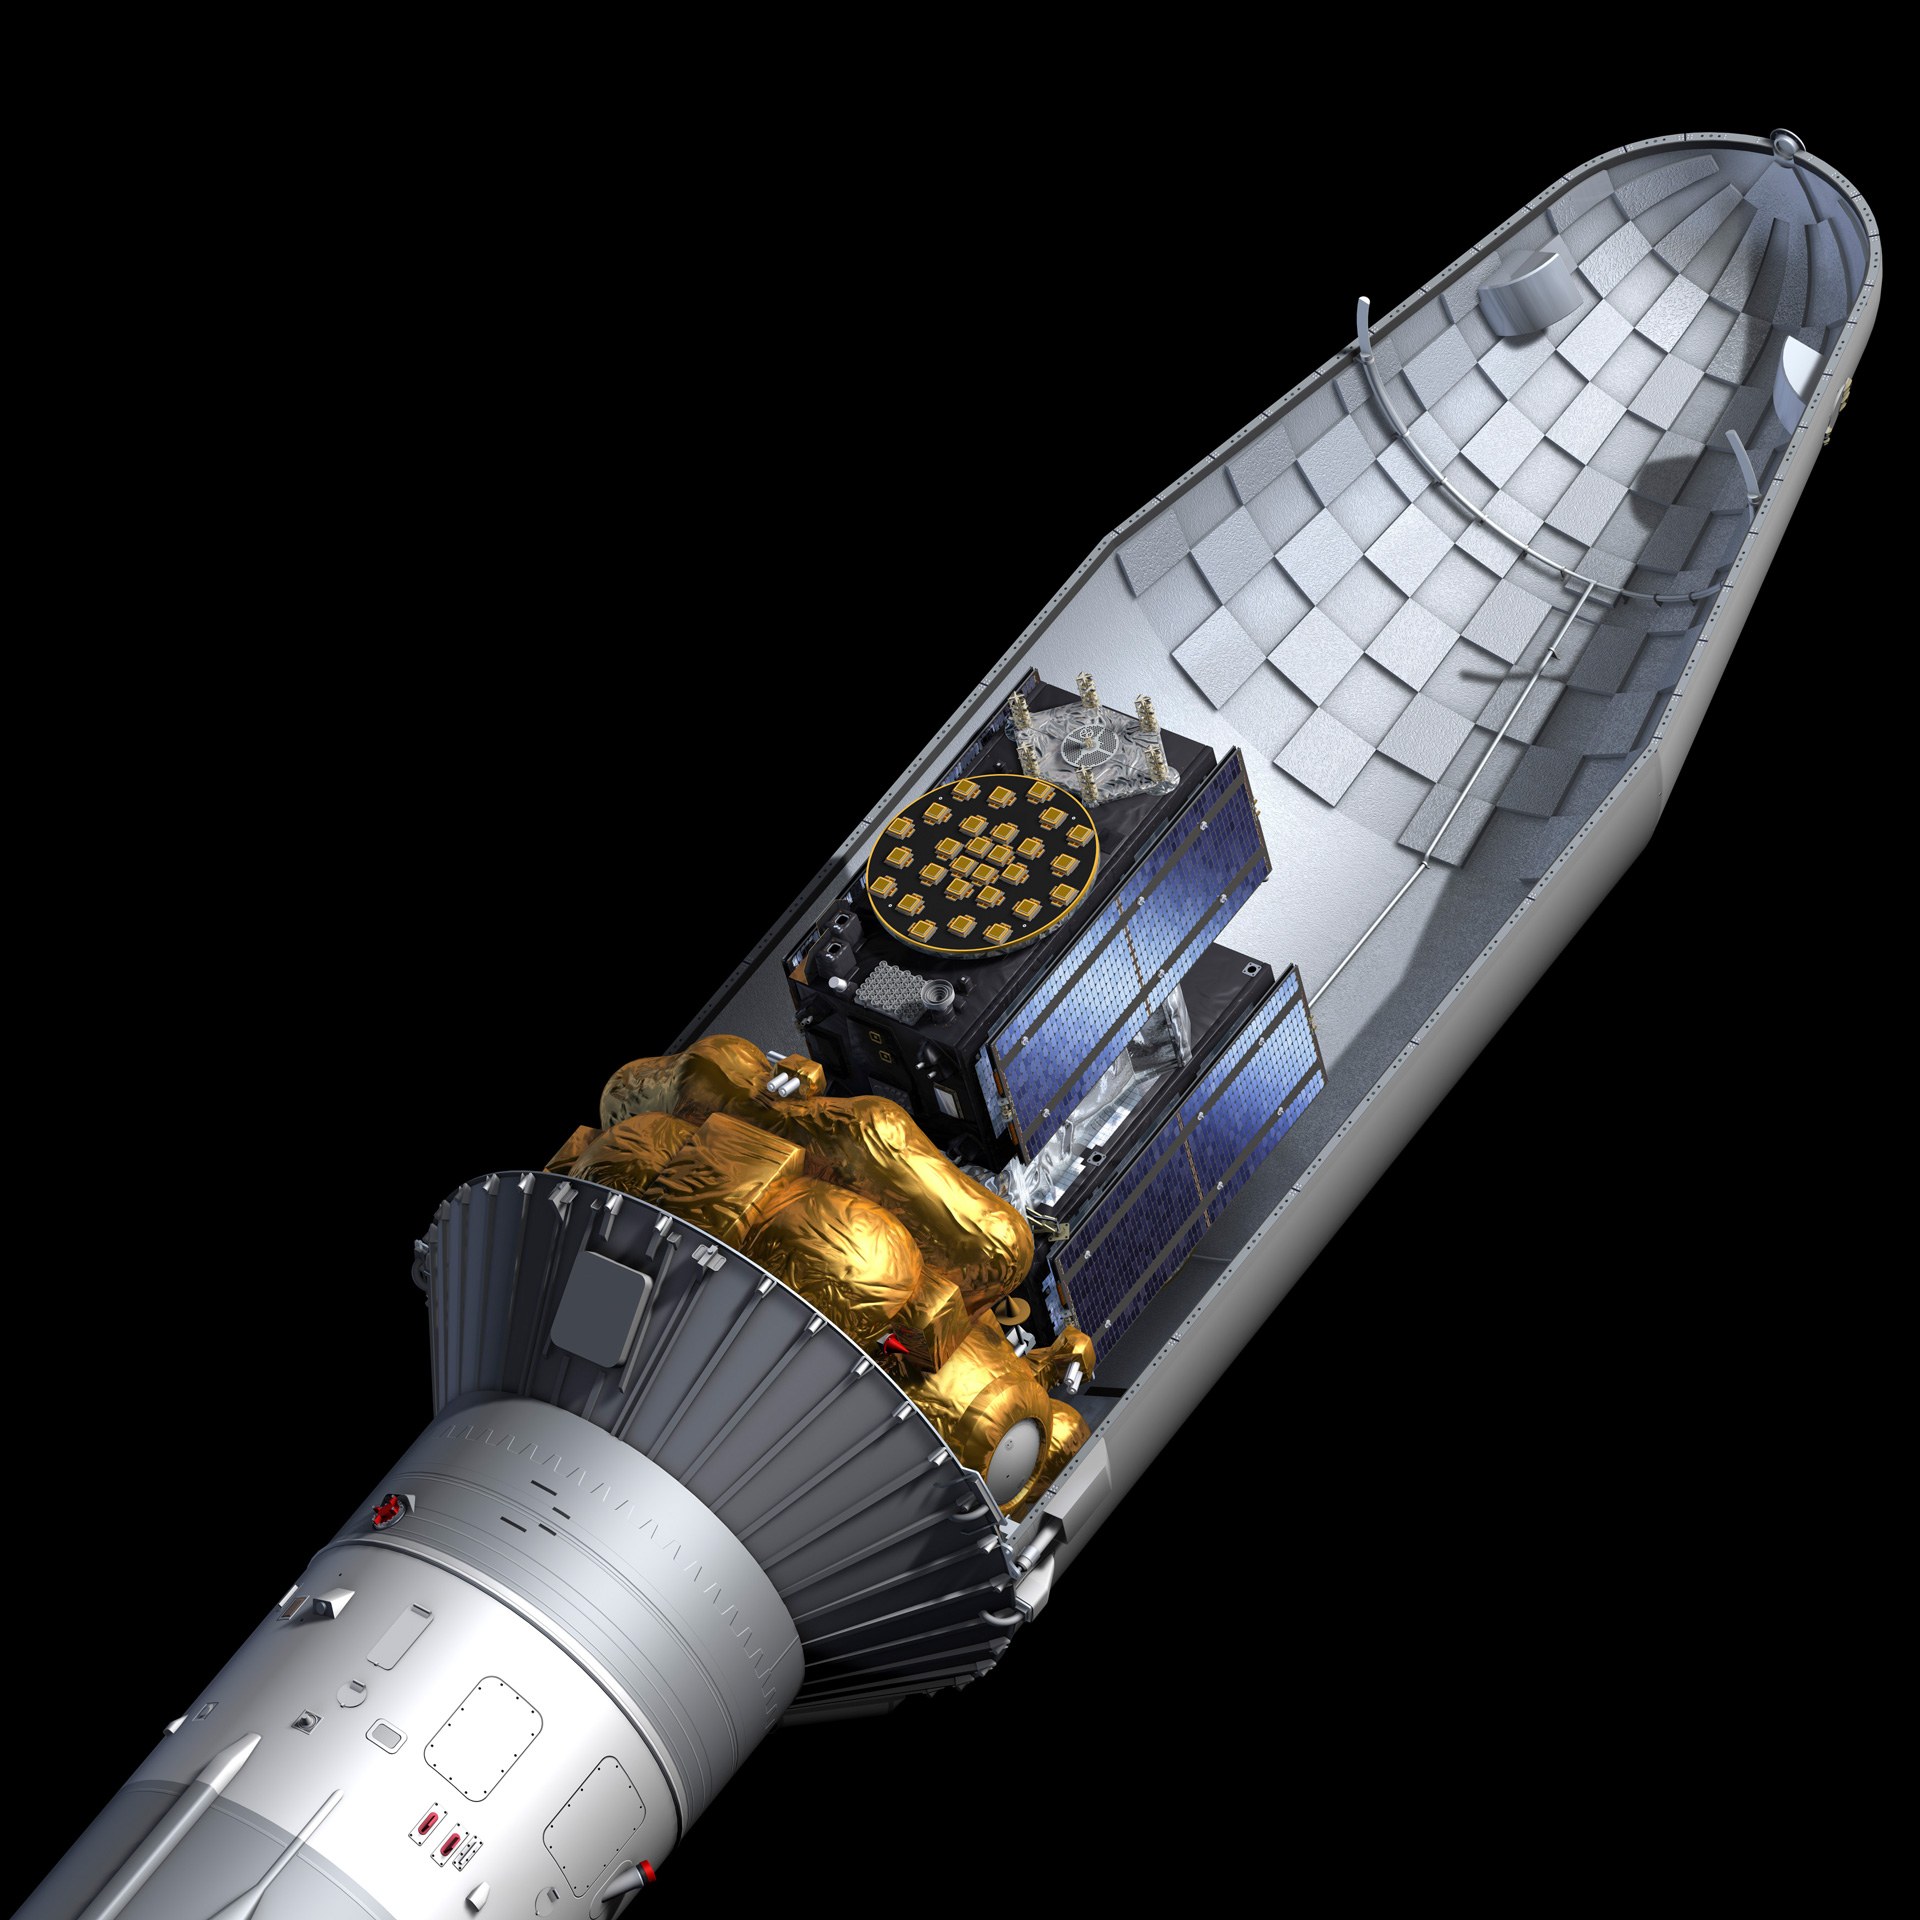 Galileo 27 and 28 installed on board their launch vehicle